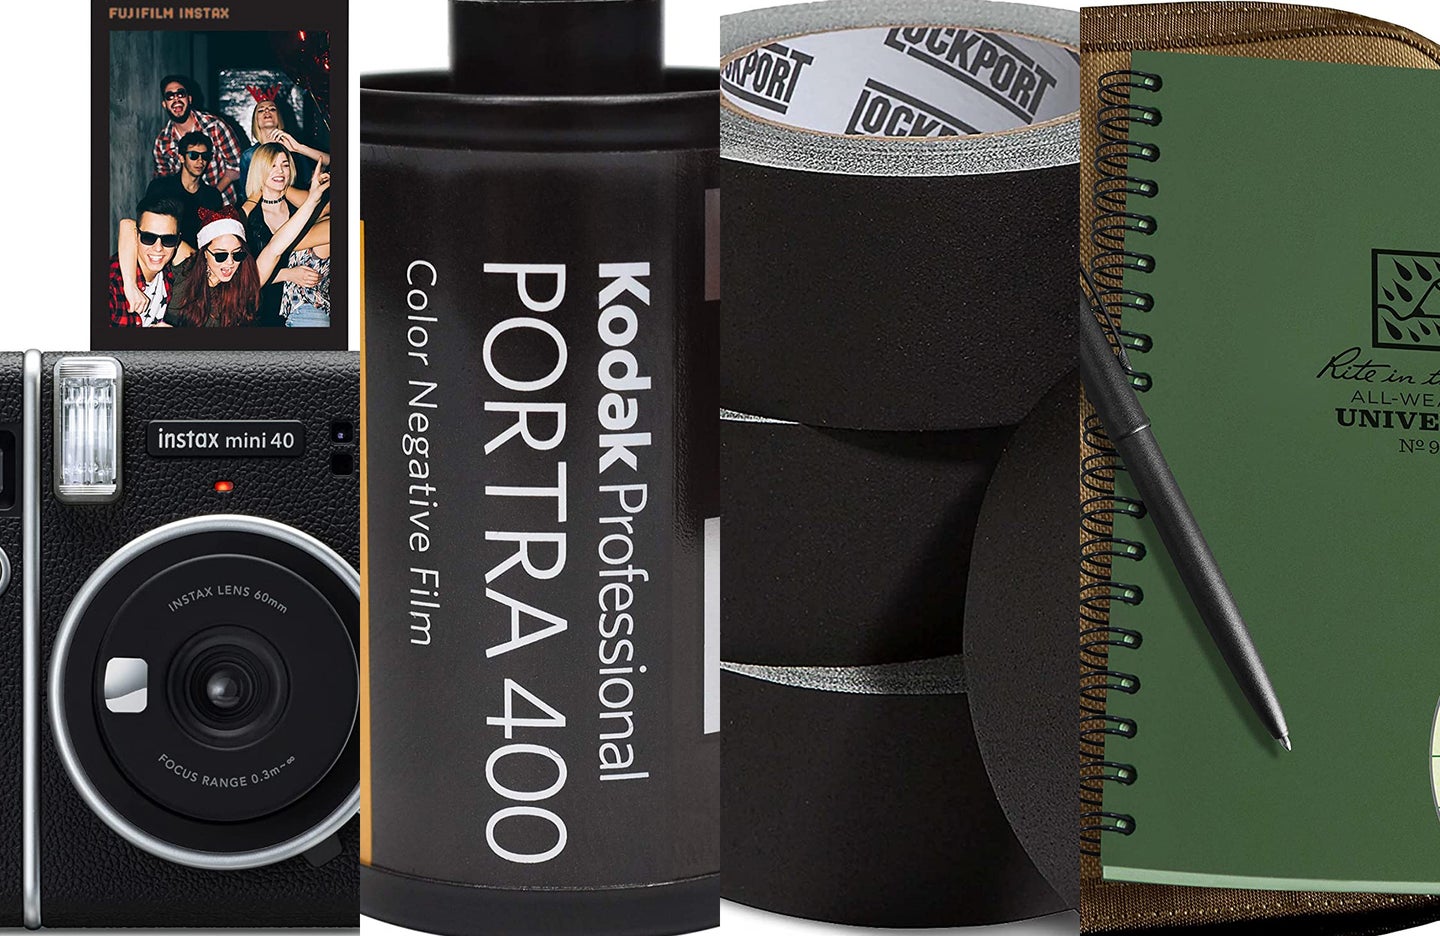 The best gifts under $100 for photographers